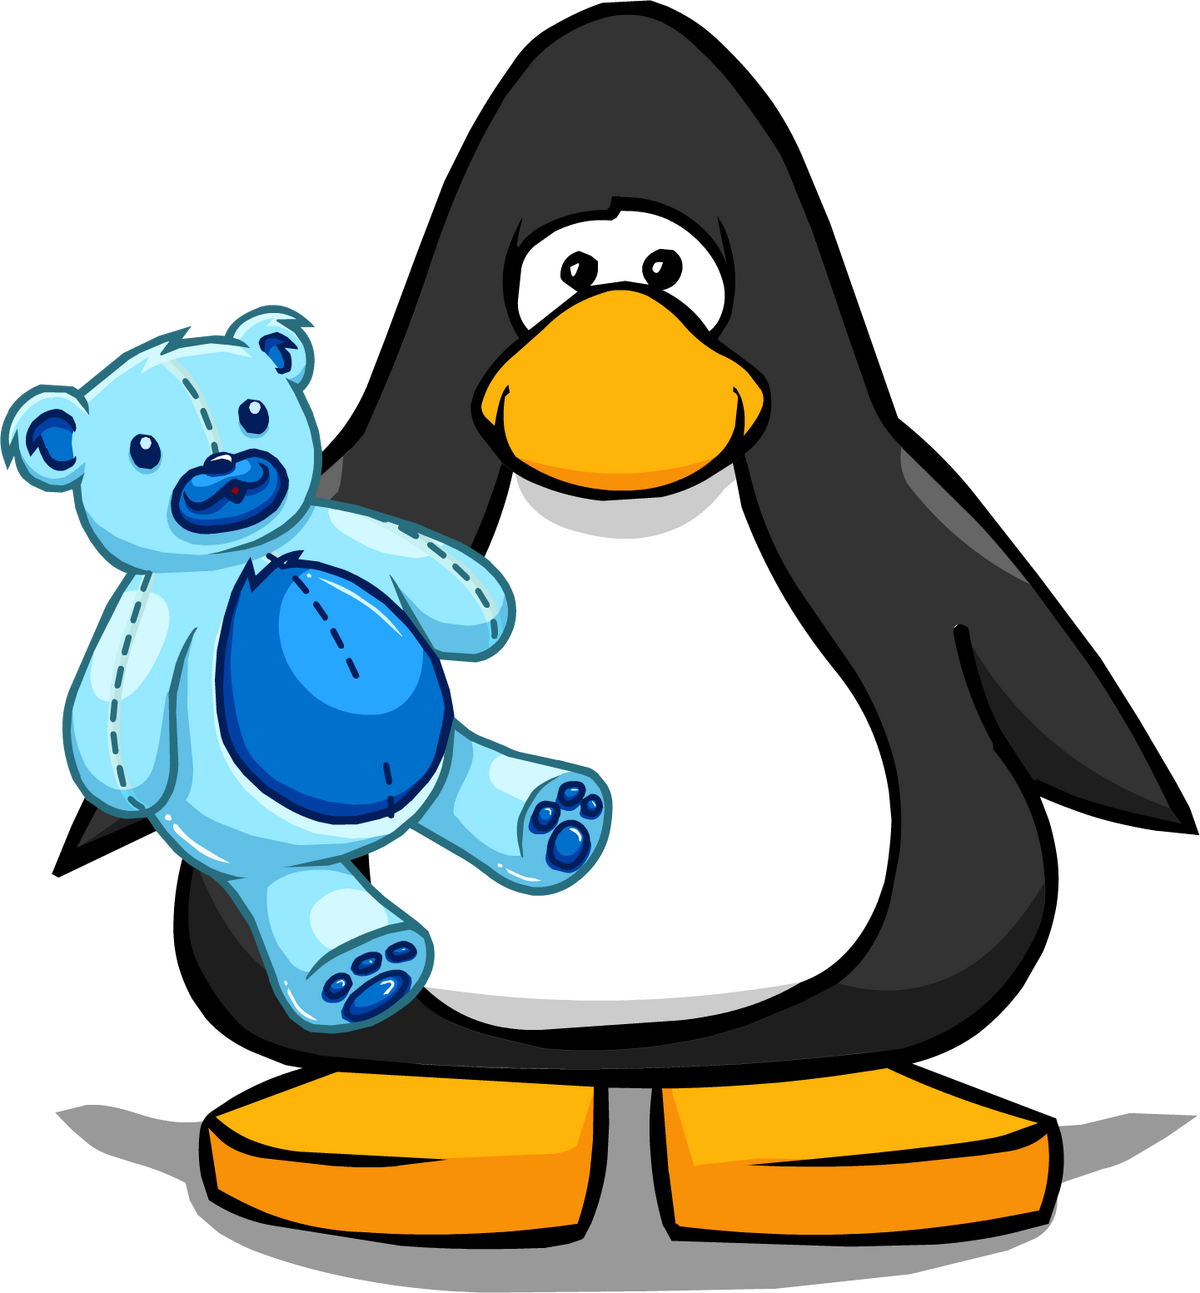 Club Penguin Sledding App now available for IOS and New Frozen Catalog - Club  Penguin News 4U